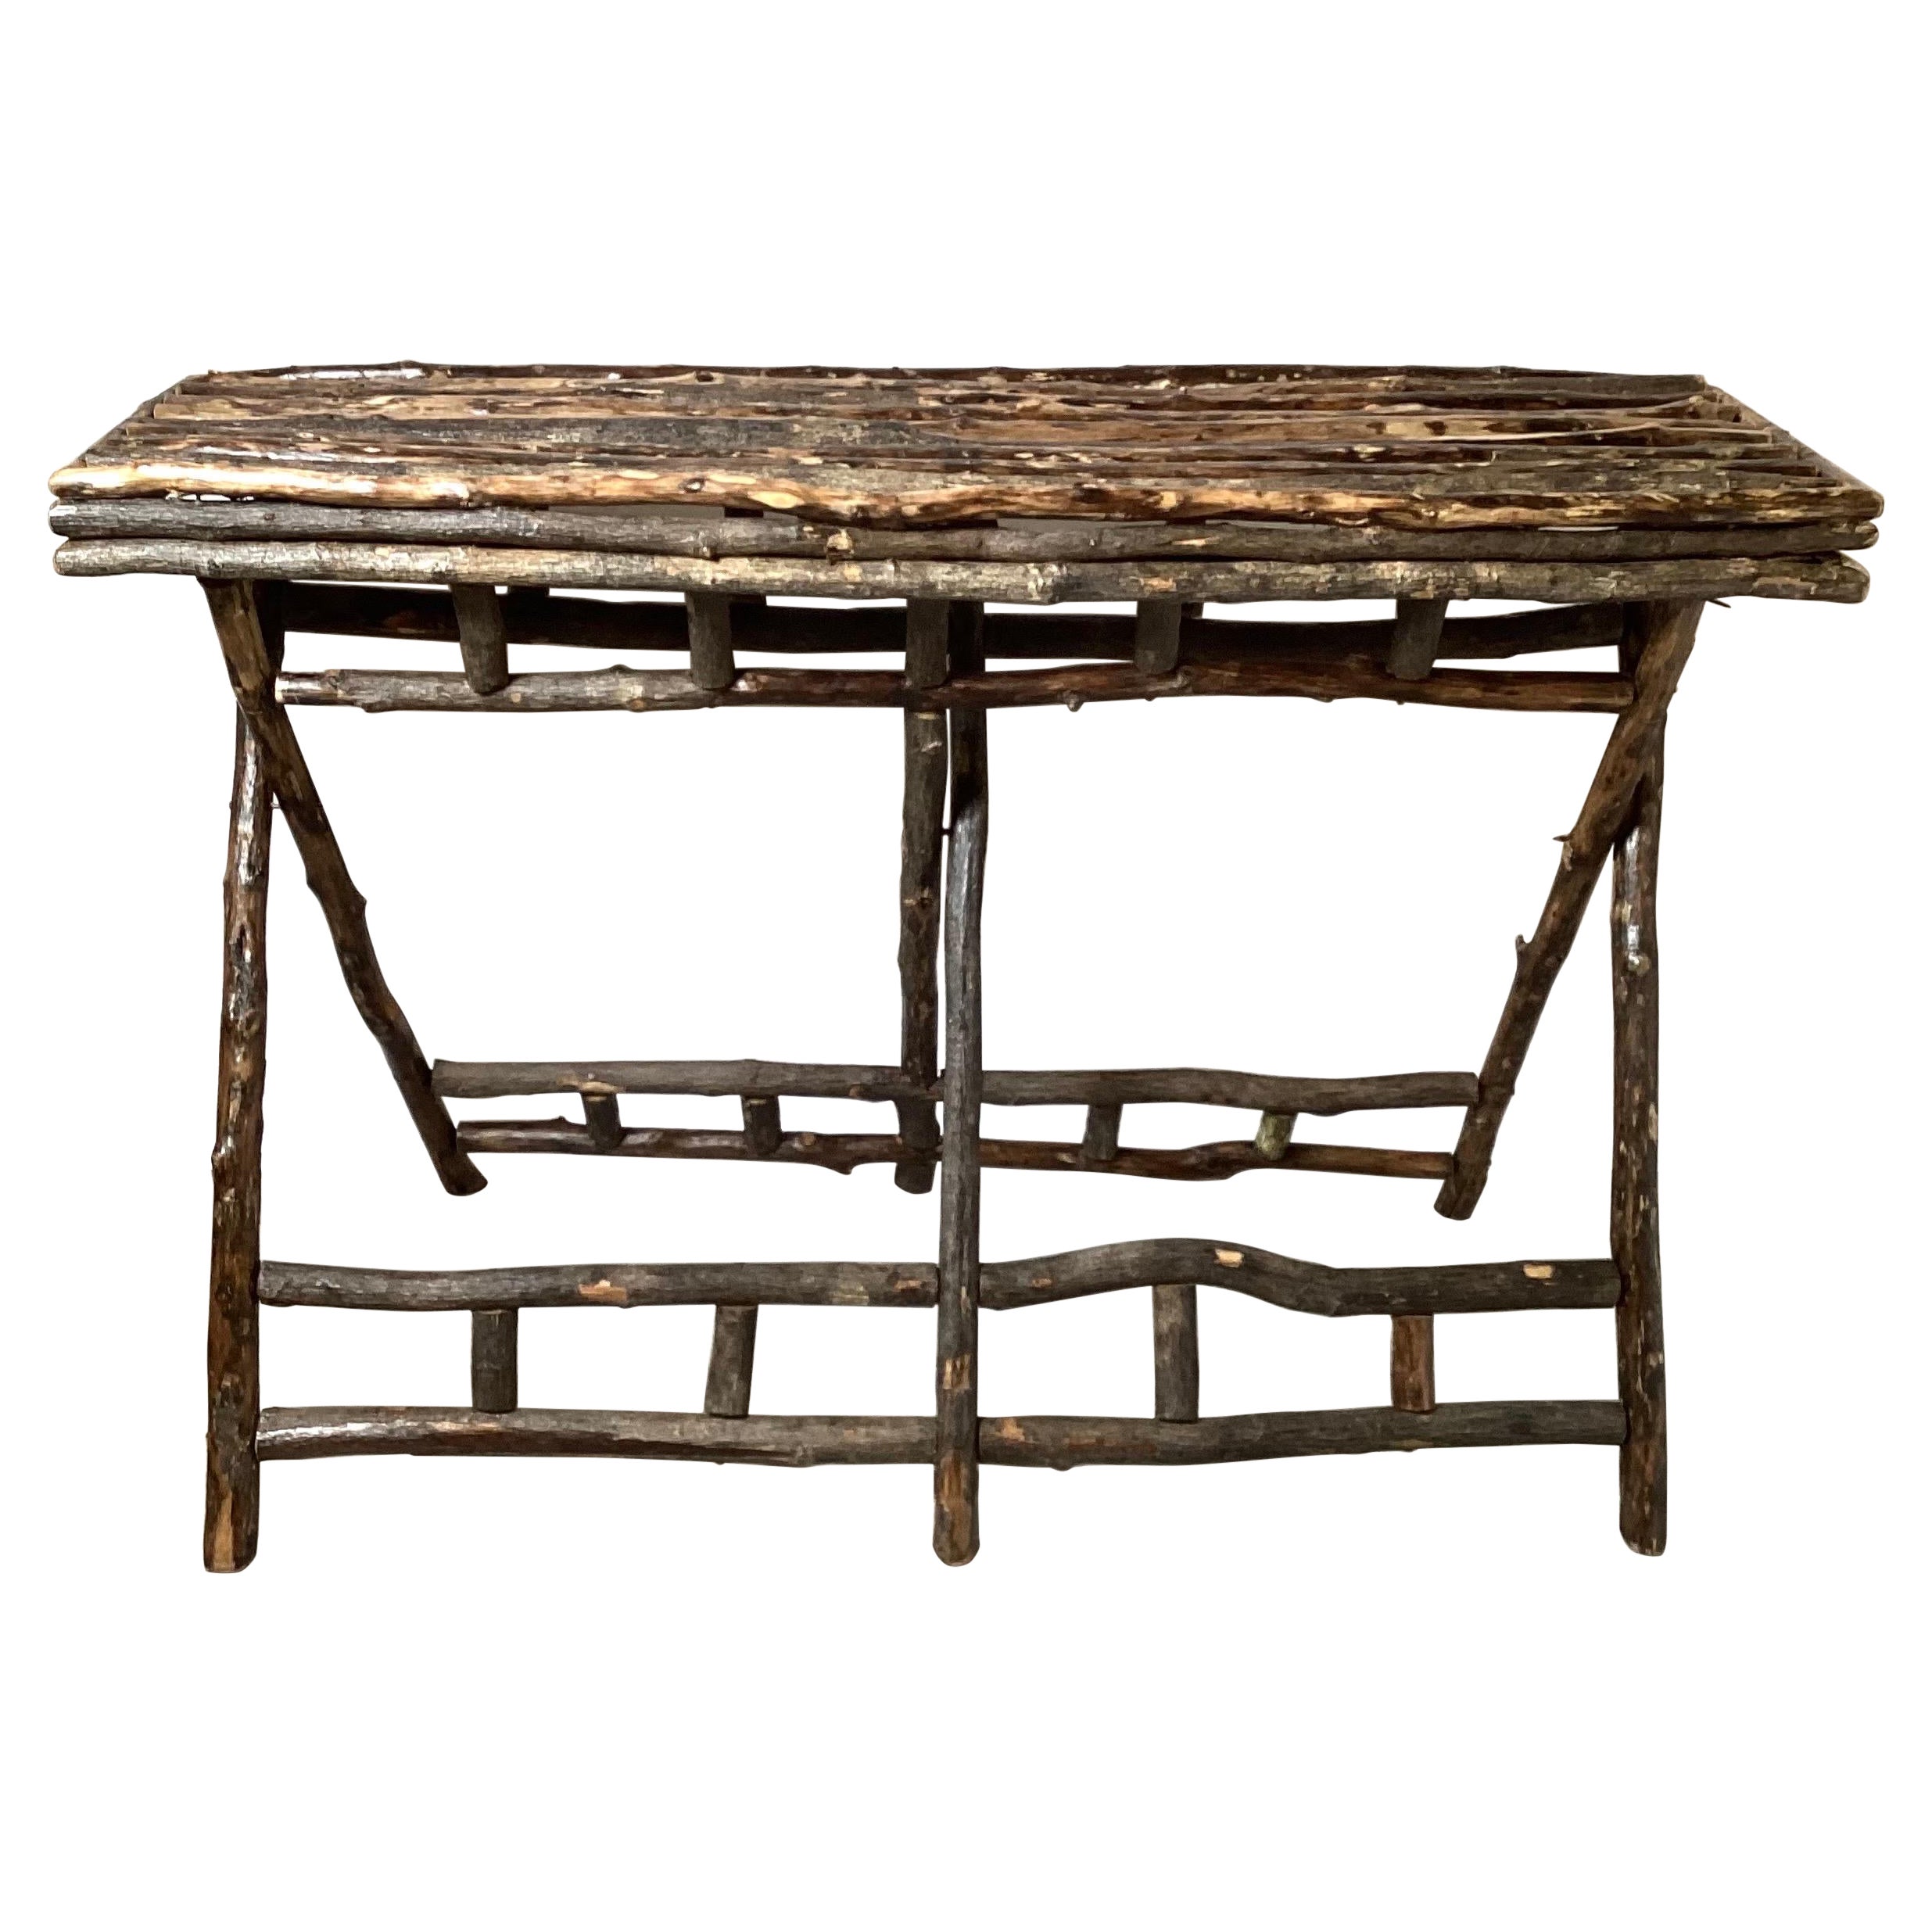 A 19th Century Rustic Adirondack Folding Table For Sale